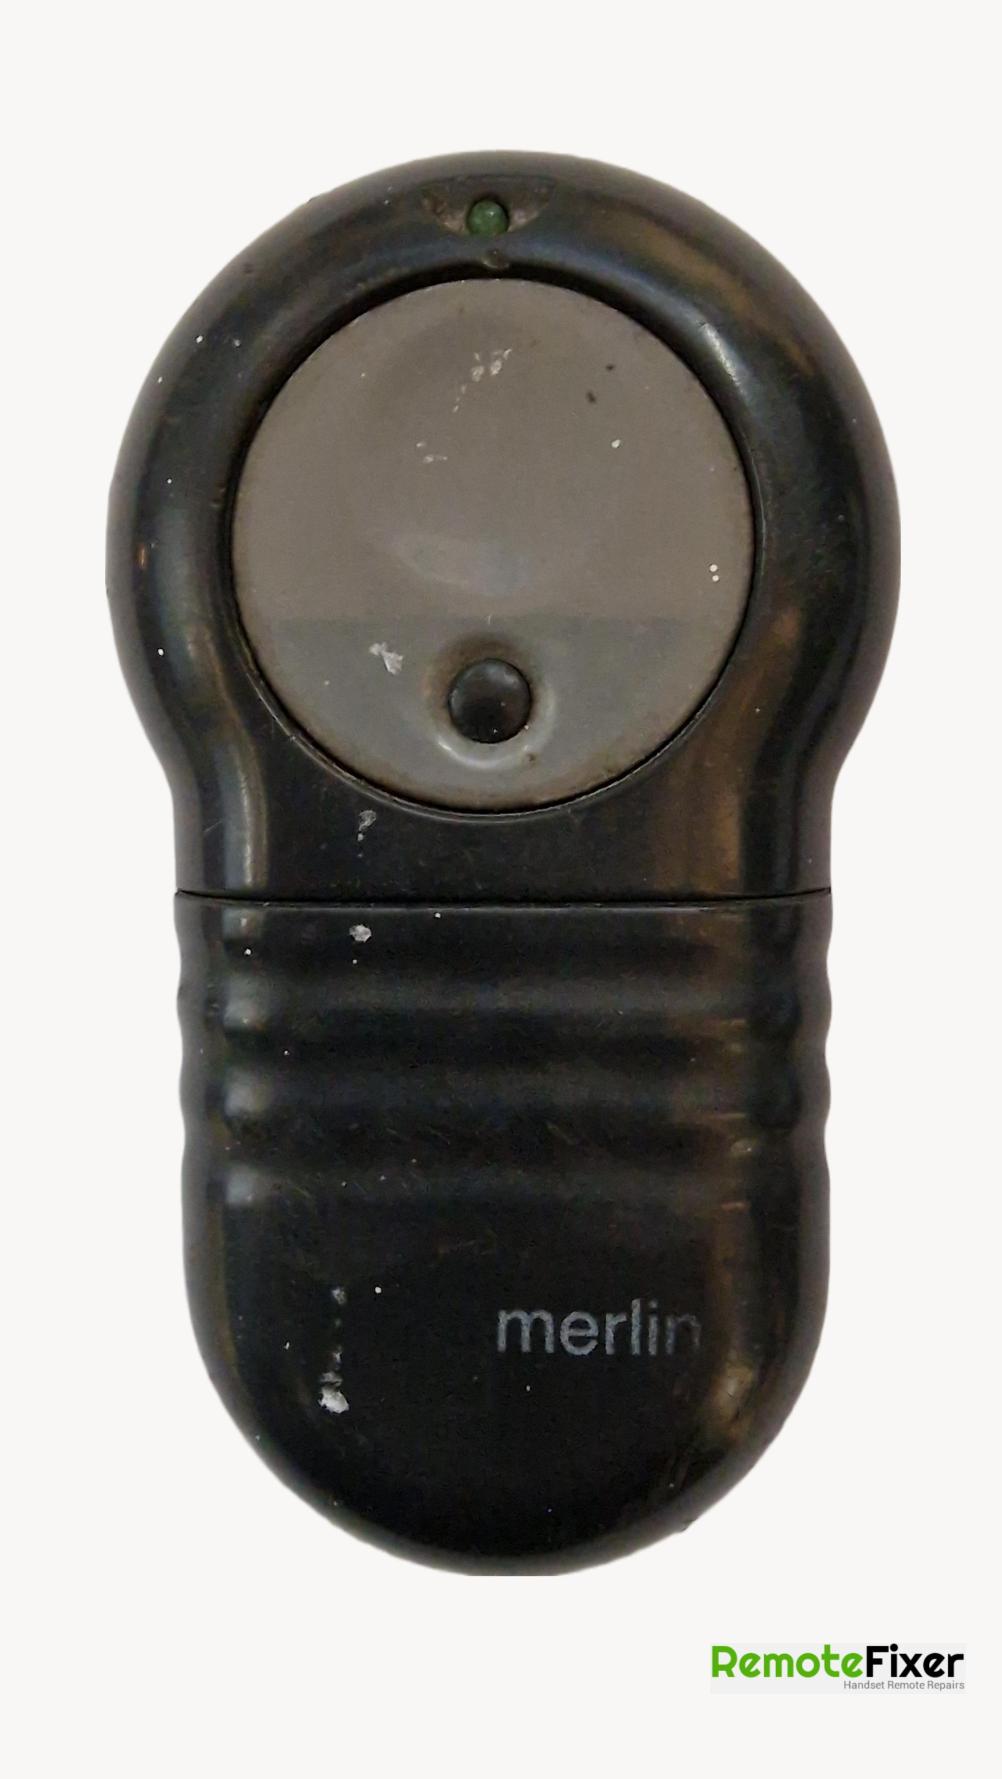 Merlin  m872 Remote Control - Front Image